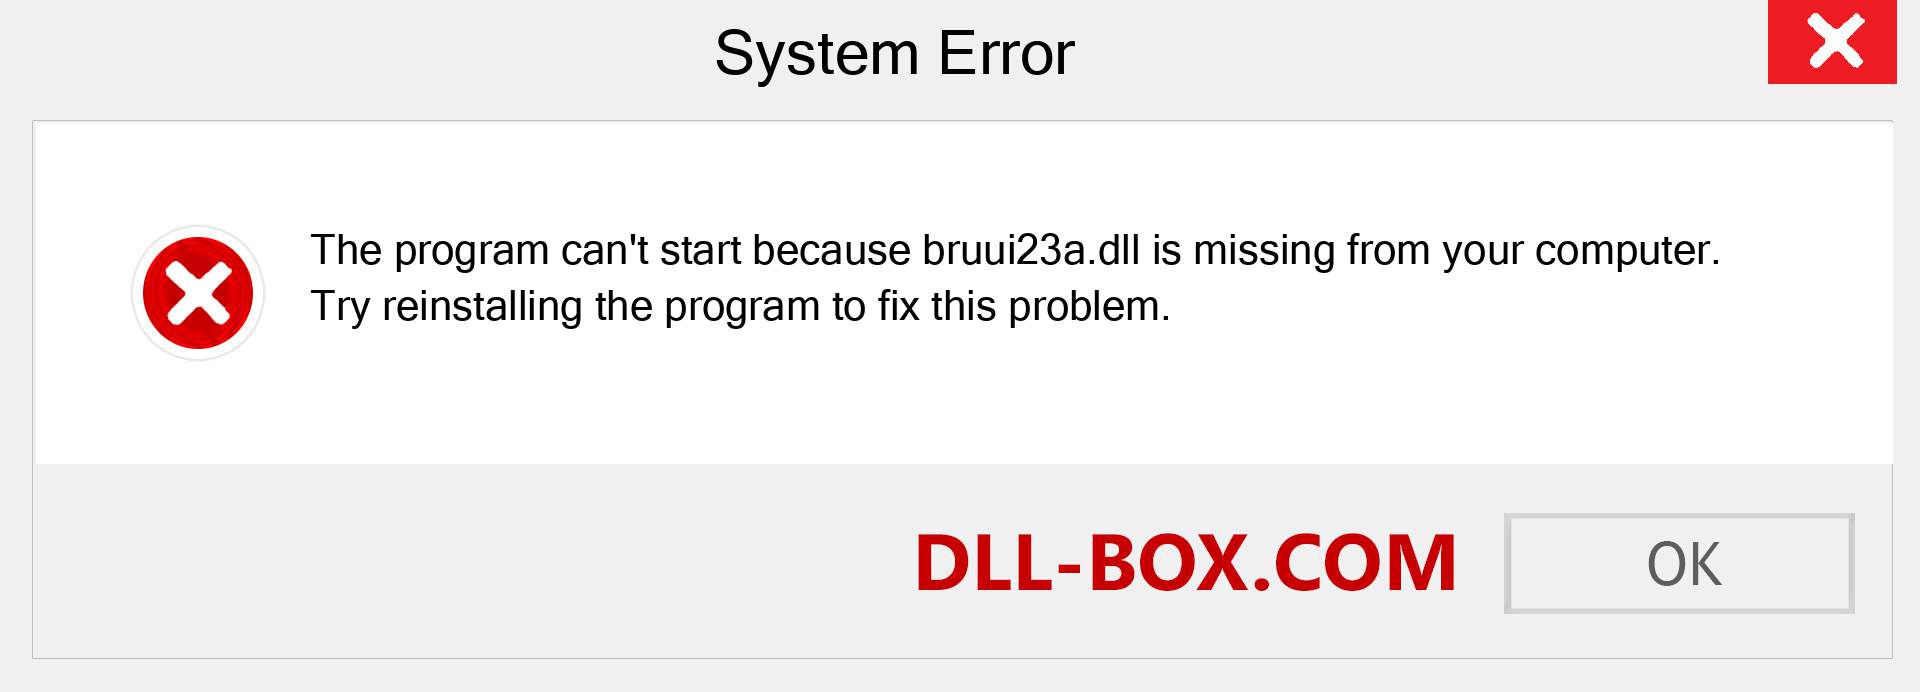  bruui23a.dll file is missing?. Download for Windows 7, 8, 10 - Fix  bruui23a dll Missing Error on Windows, photos, images